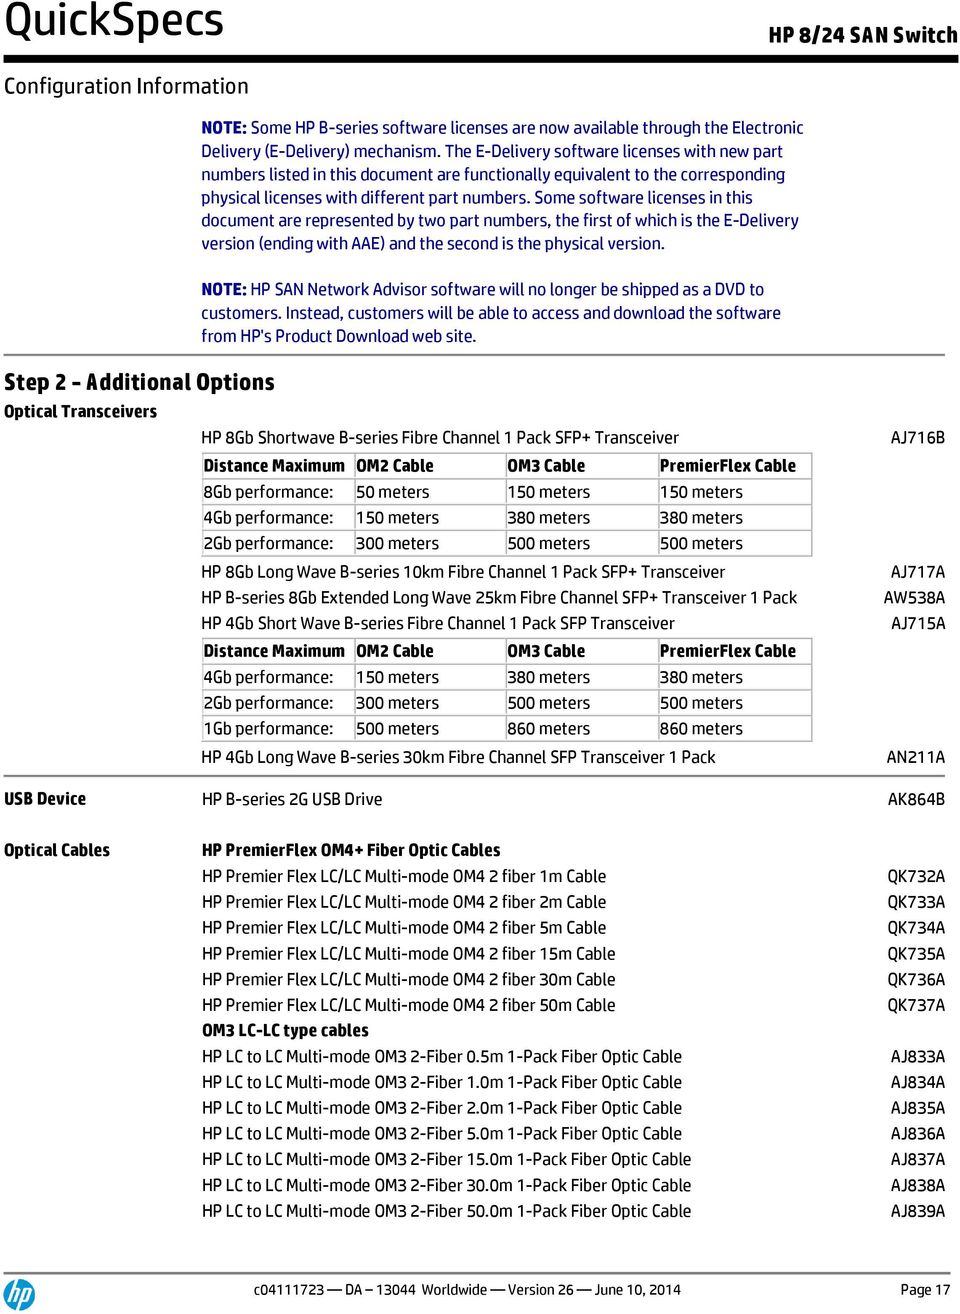 Some software licenses in this document are represented by two part numbers, the first of which is the E-Delivery version (ending with AAE) and the second is the physical version.